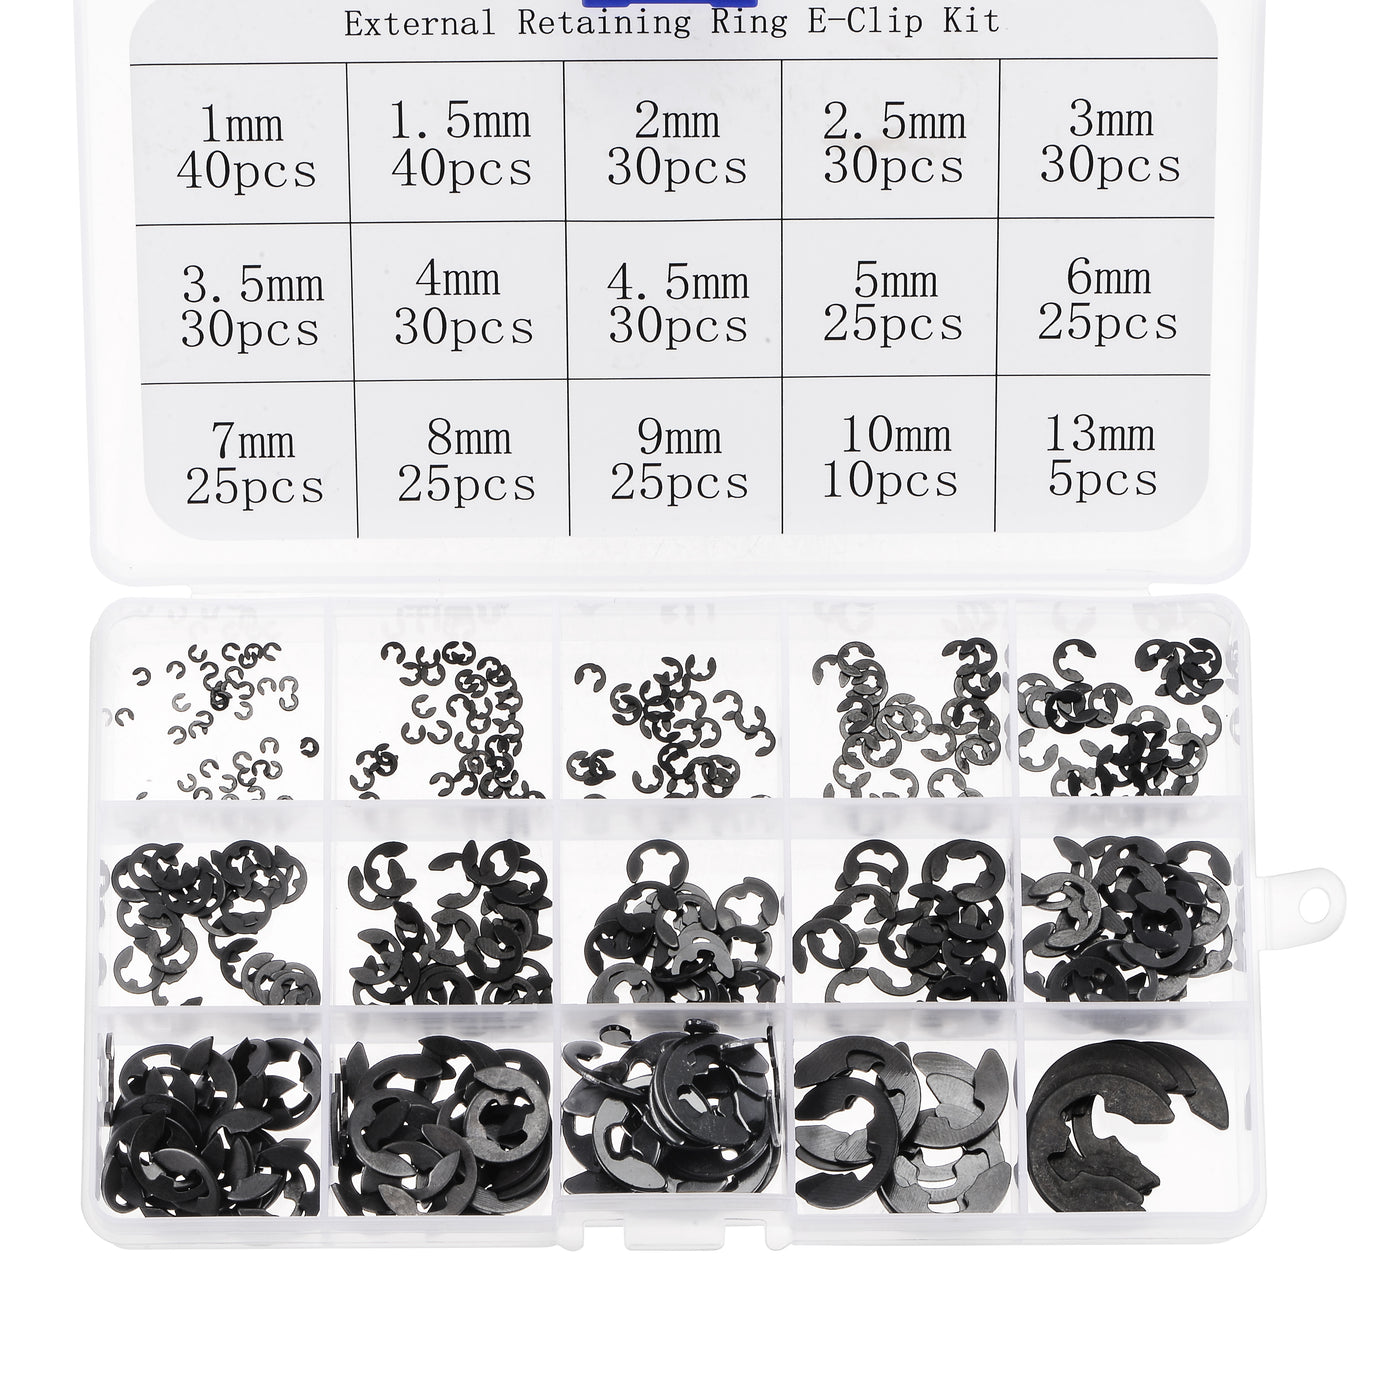 uxcell Uxcell E-Clip 400Pcs 15-Size External Retaining Ring Carbon Steel Set Size: 1mm to 13mm